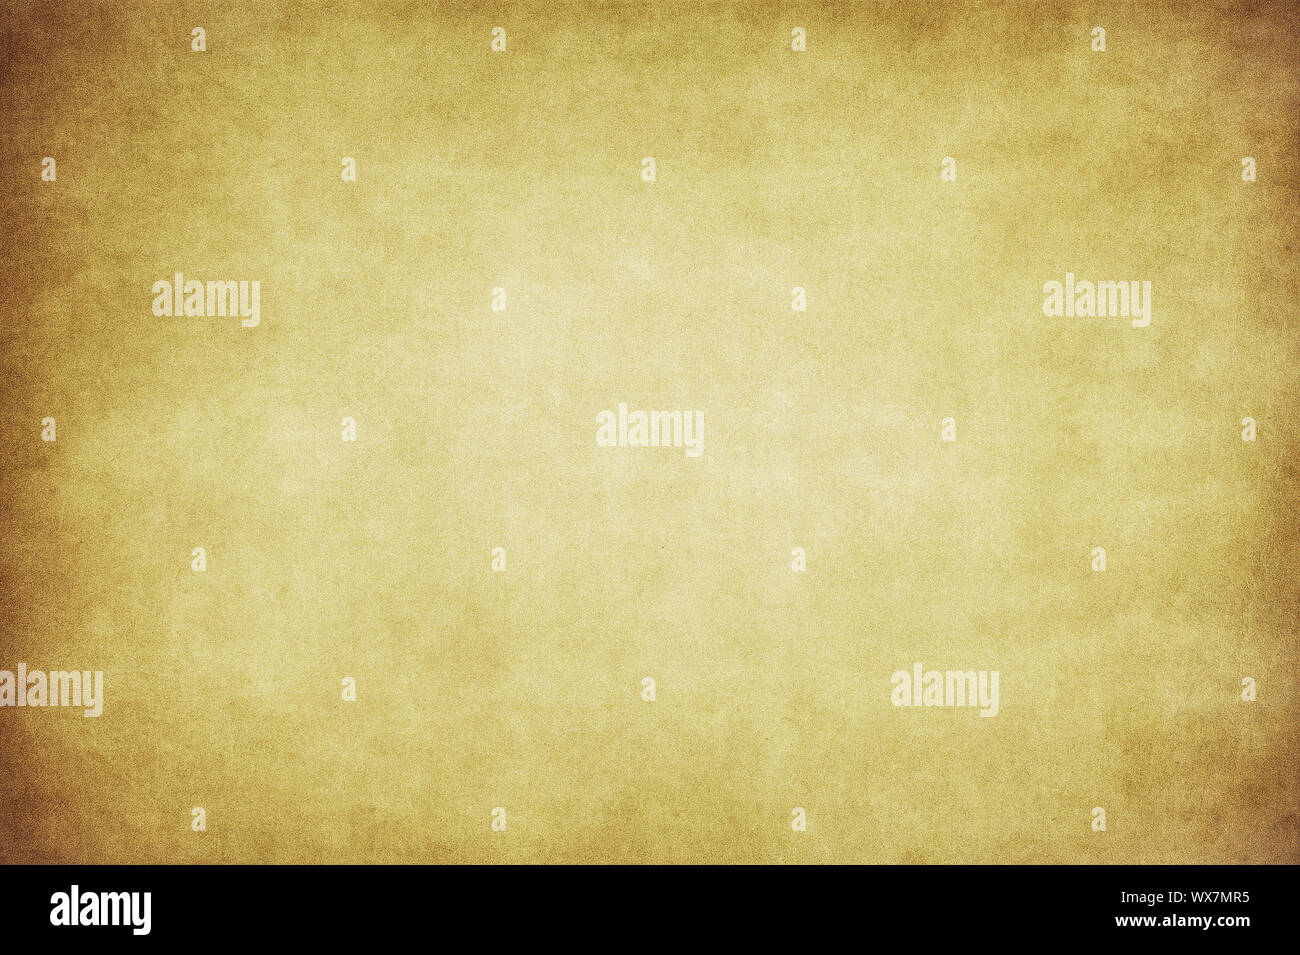 Old paper texture. Vintage paper background. Stock Photo